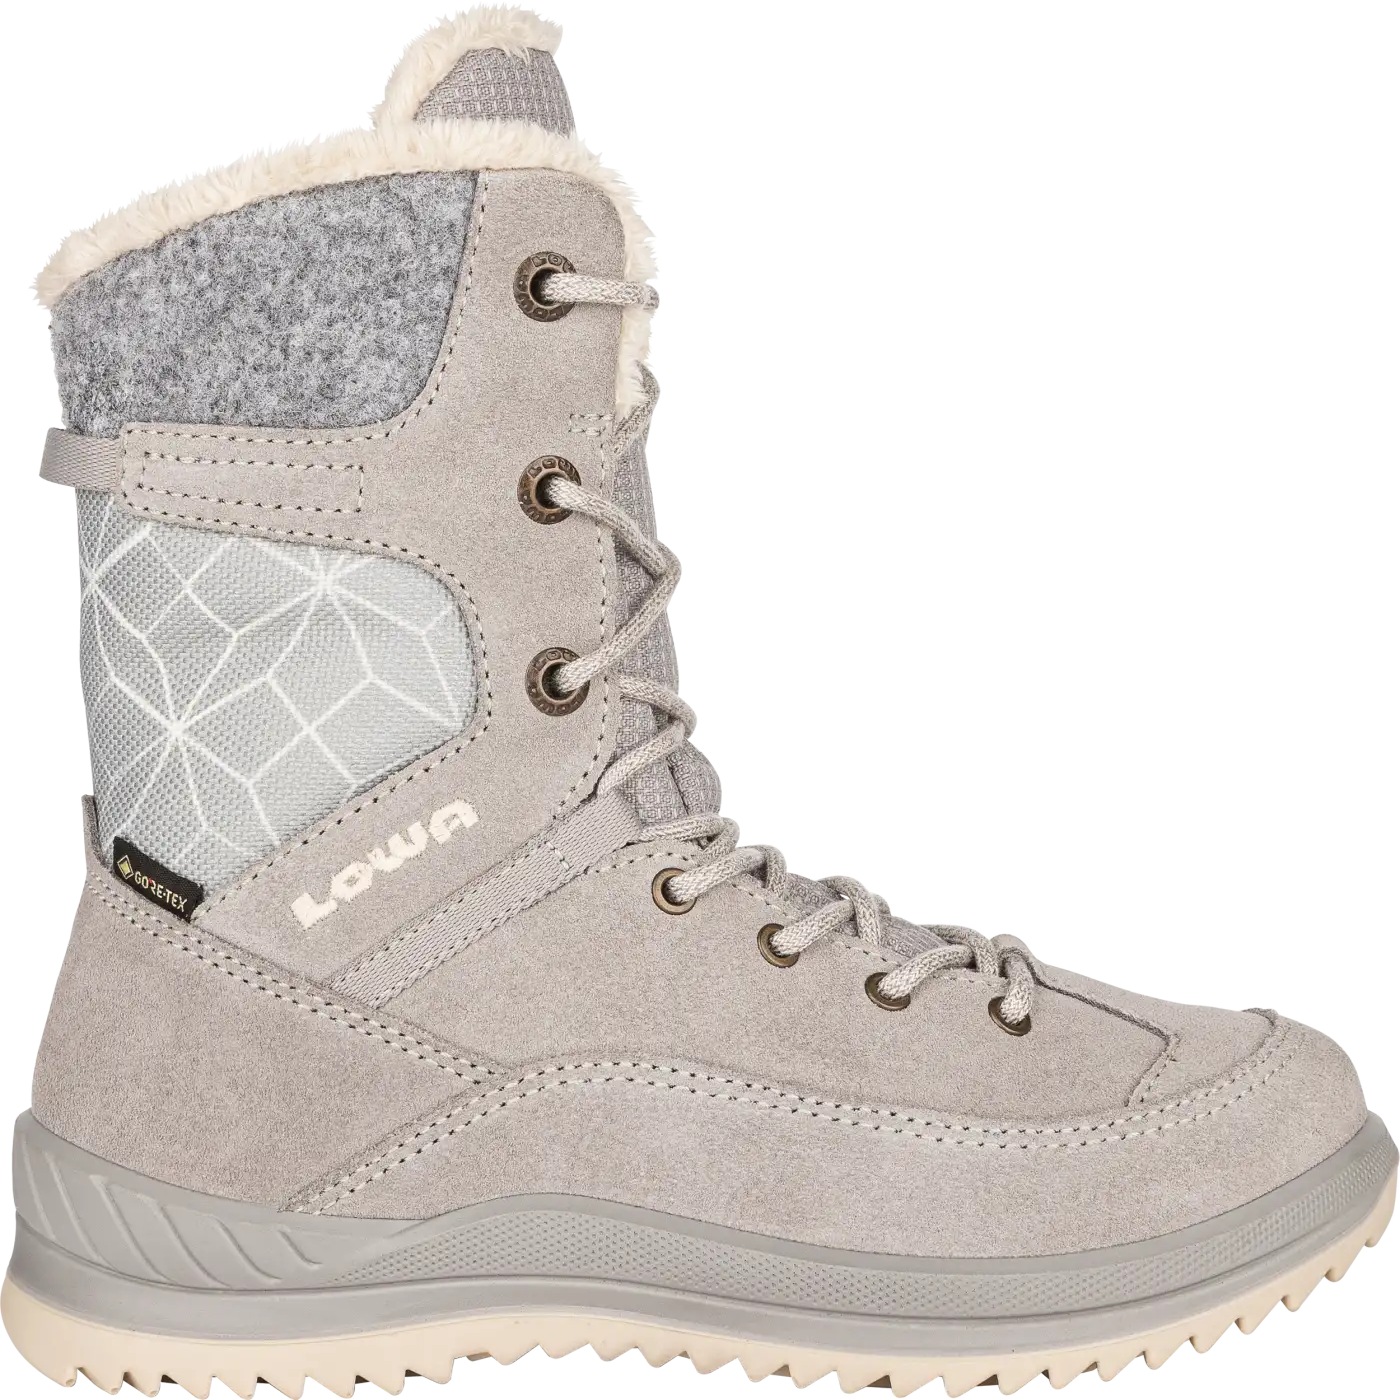 Picture of LOWA Bianca GTX Junior Kids Shoes - light grey (Size 30-35)